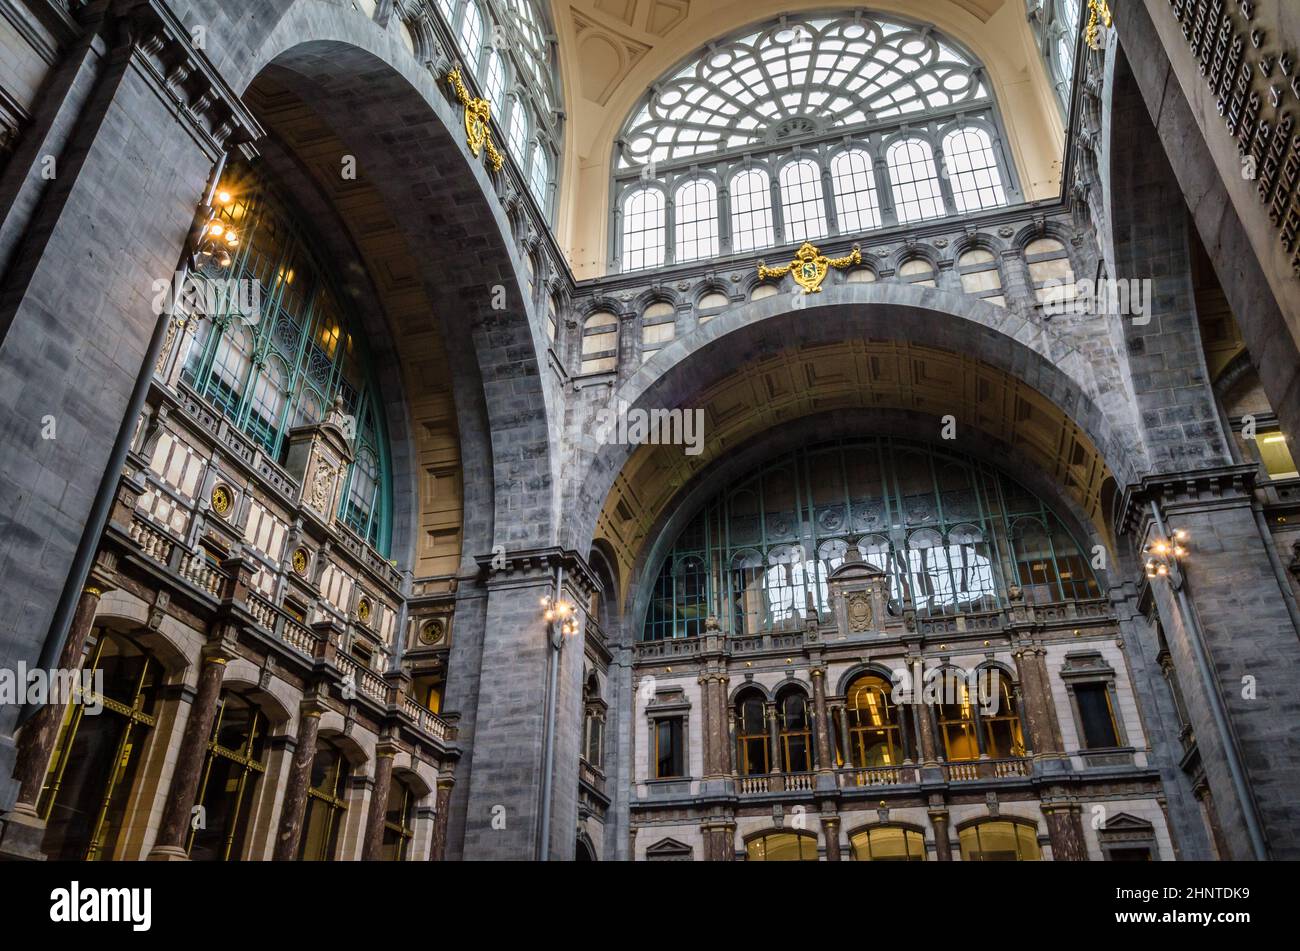 ANTWERP, BELGIUM - AUGUST 22, 2013: Beautiful interior of Antwerpen-Centraal, the main train station in the Belgian city of Antwerp. The station is colloquially known as the railroad cathedral Stock Photo